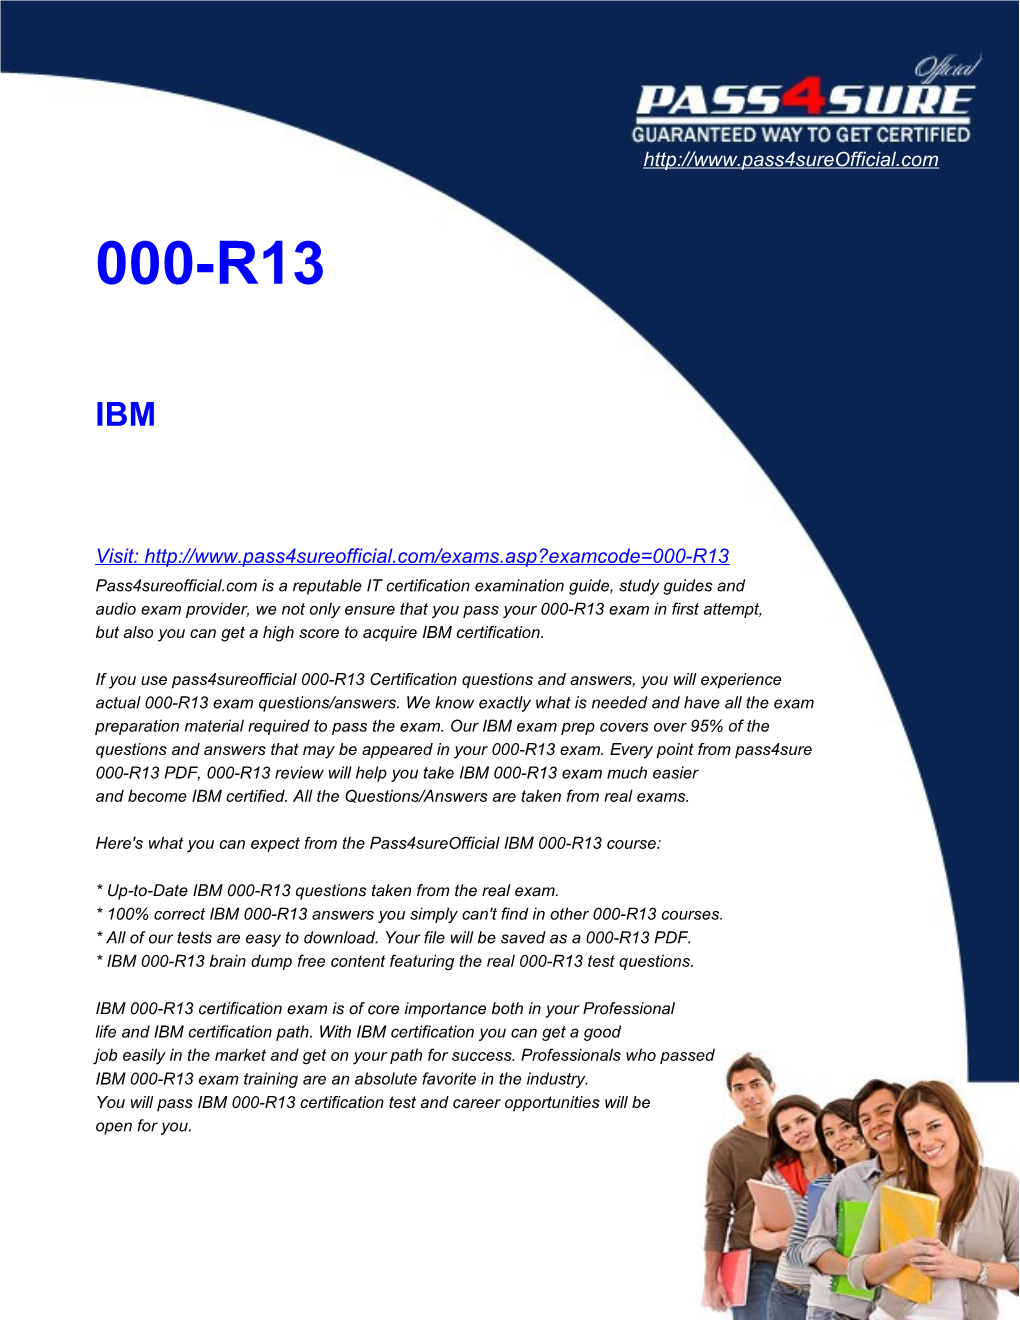 Here's What You Can Expect from the Pass4sureofficial IBM 000-R13 Course